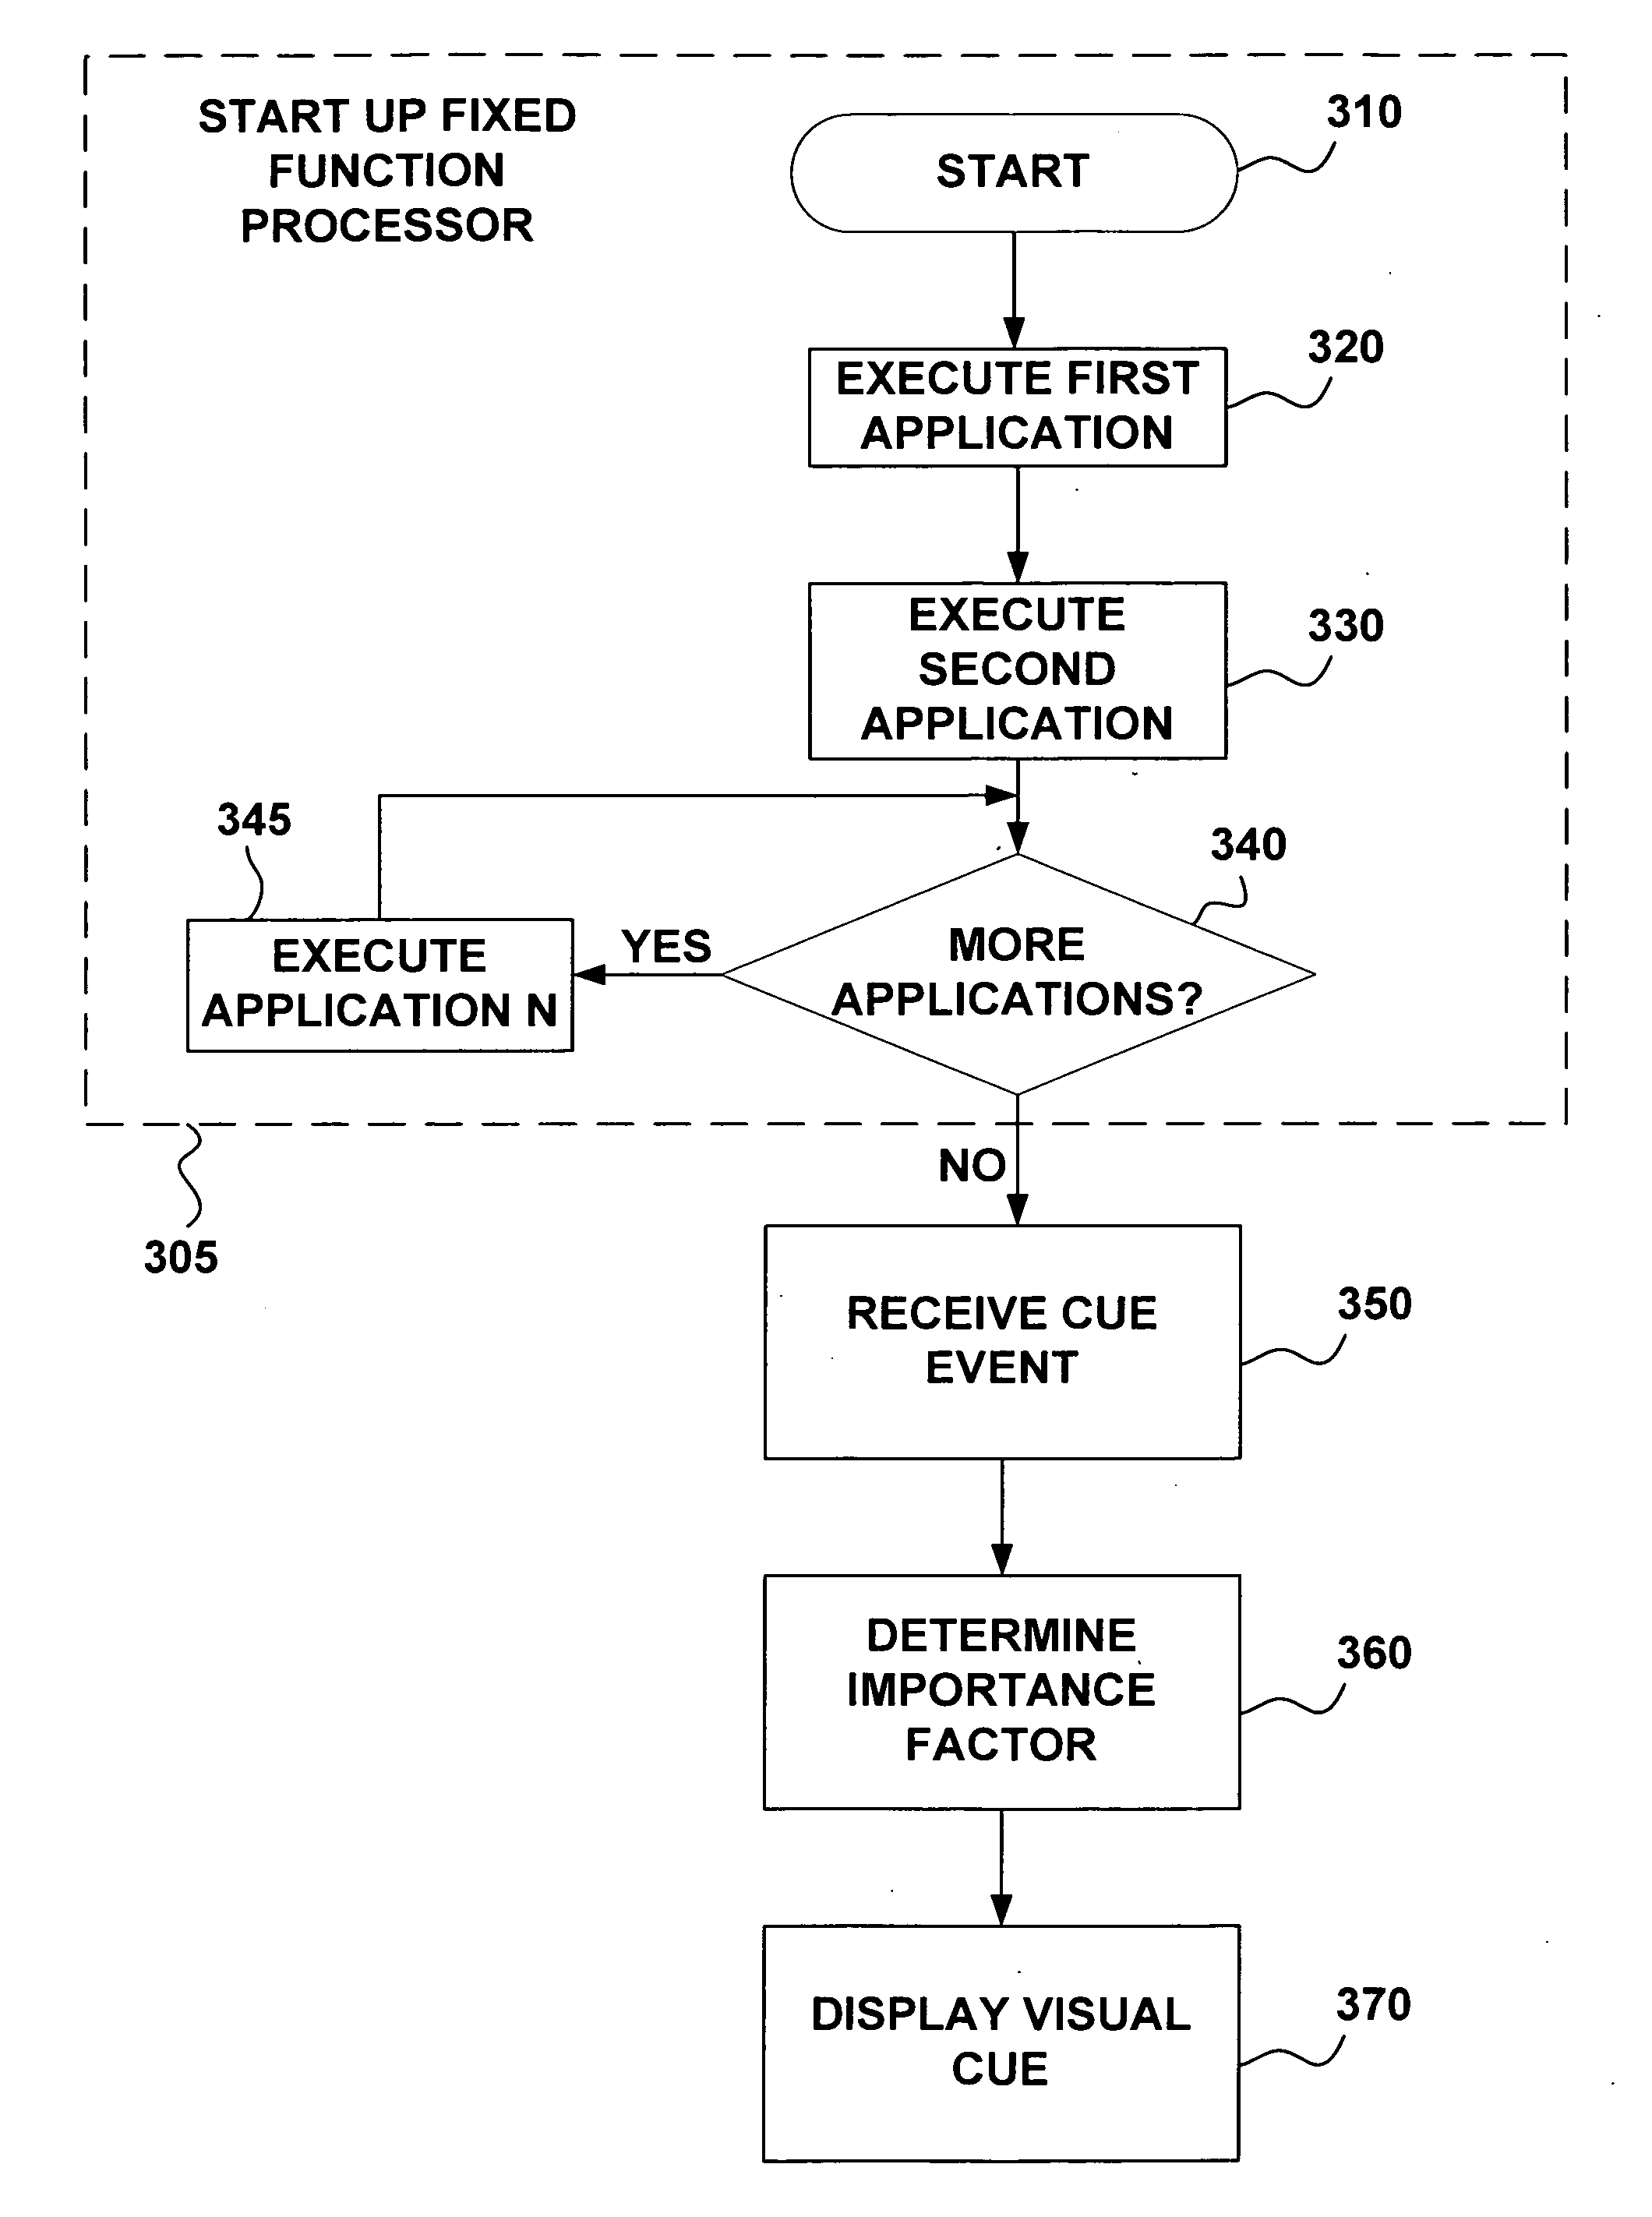 System, method and software for displaying visual cues